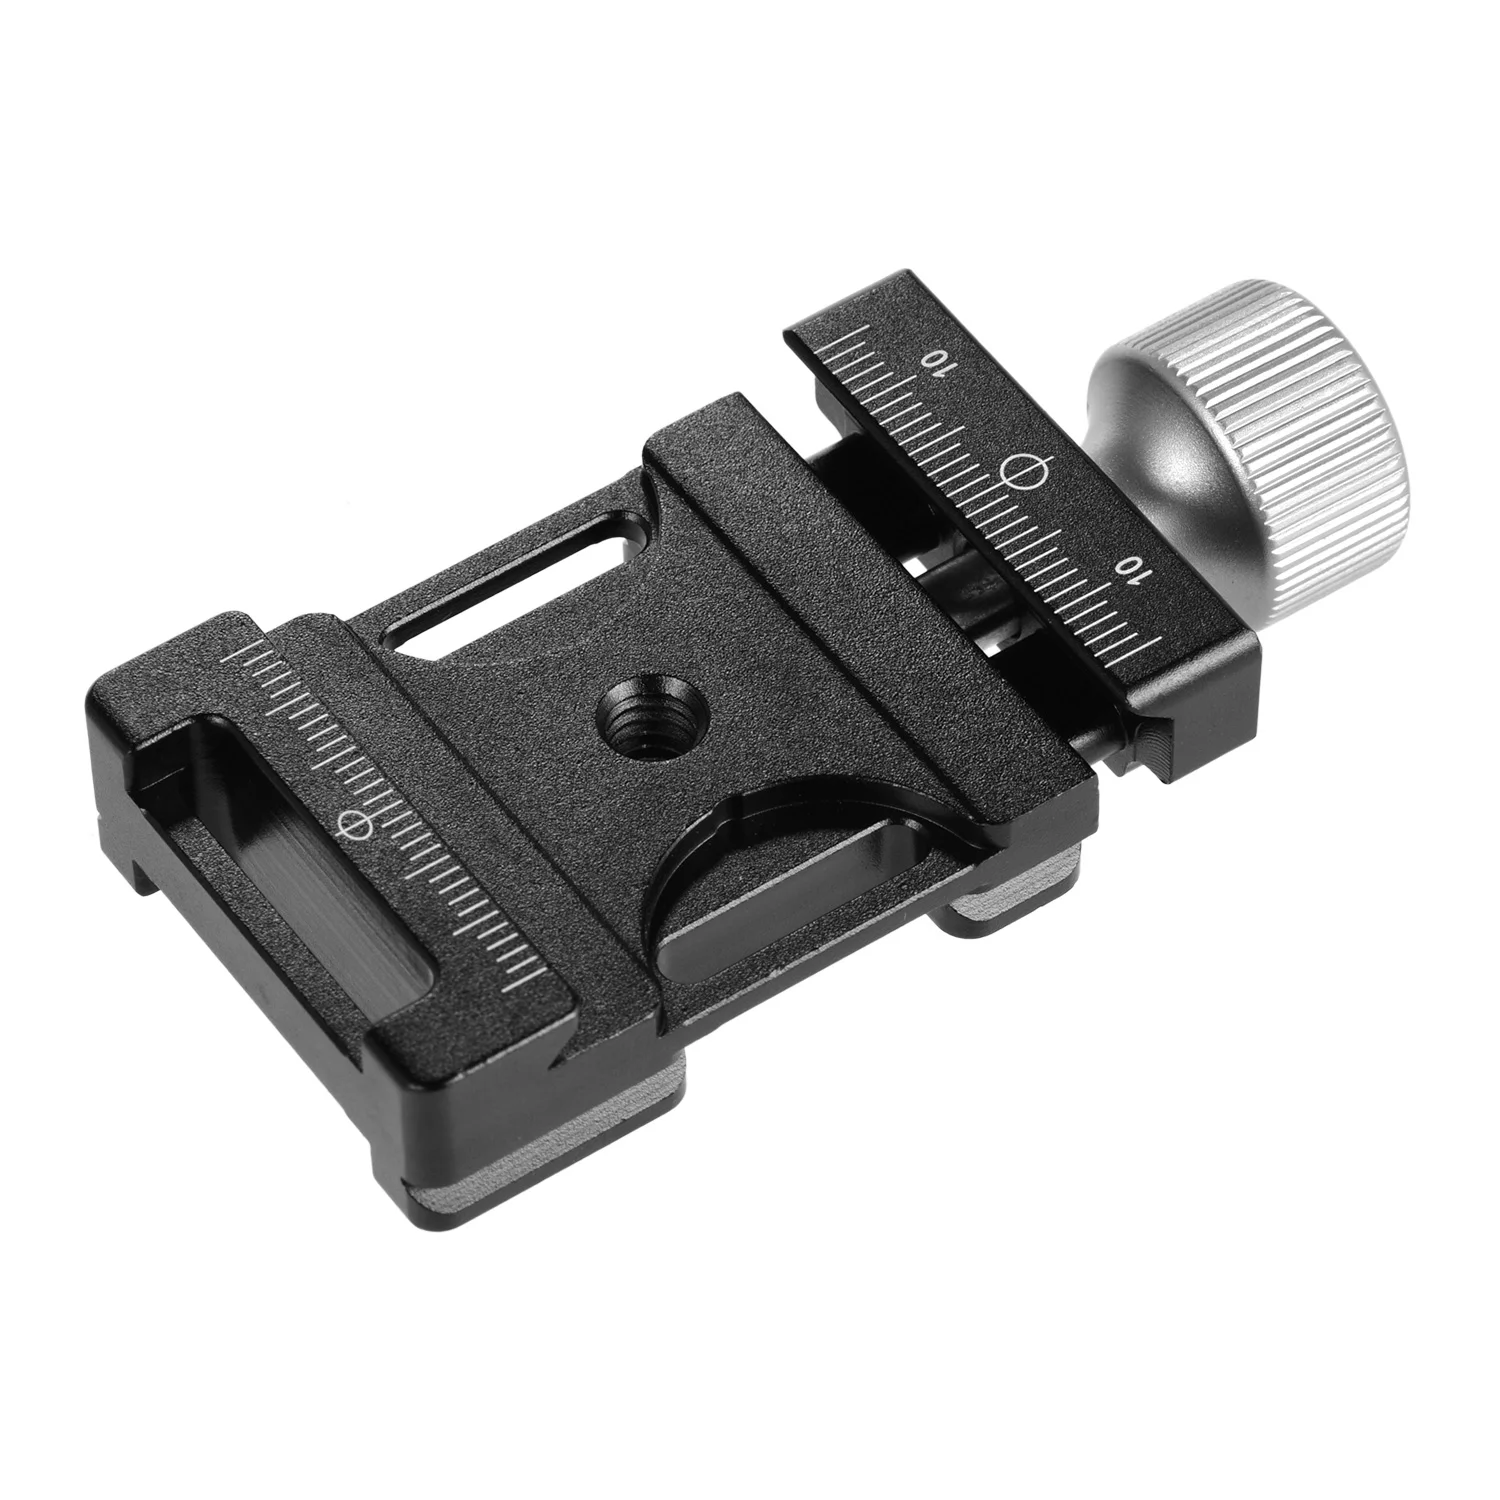 

Aluminium alloy Quick Release Clamp 38mm Screw Knob Clamp with 1/4 inch hole for Arca-Swiss QR Plate for Tripod Ball head DC-38Q